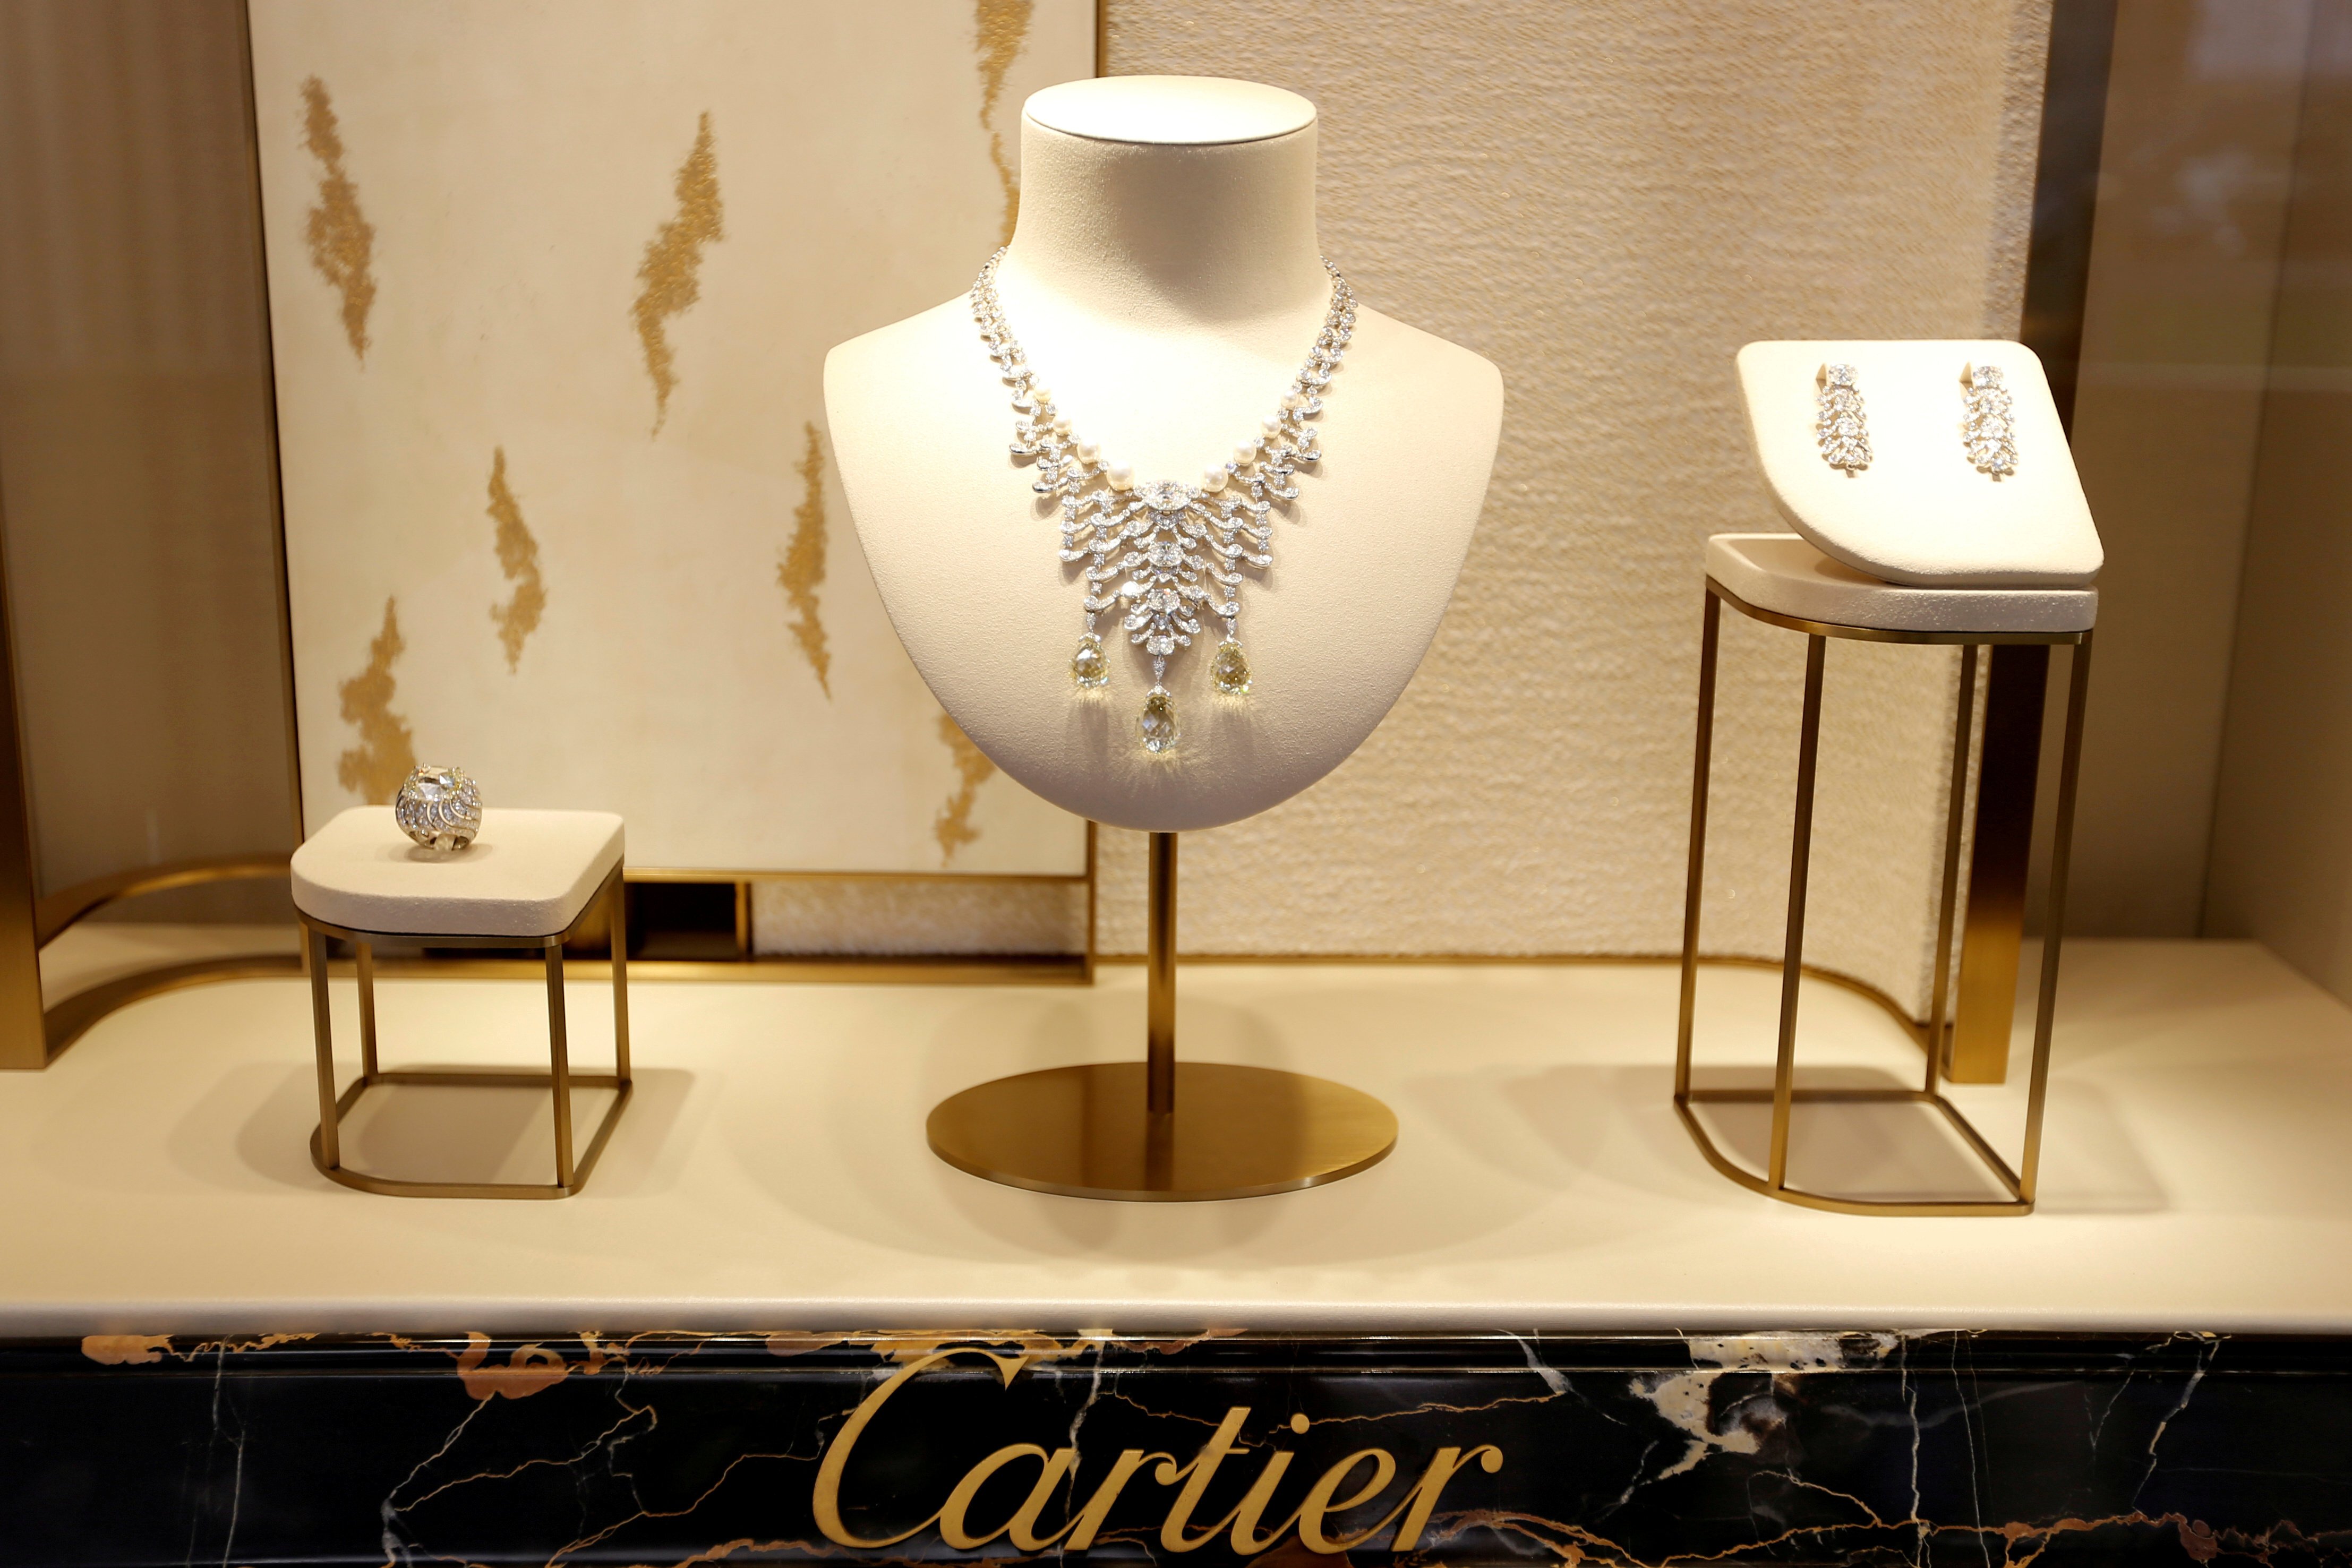 Blockchain explored by Louis Vuitton, Prada and Cartier to fight  counterfeiters by guaranteeing the authenticity of luxury fashion items